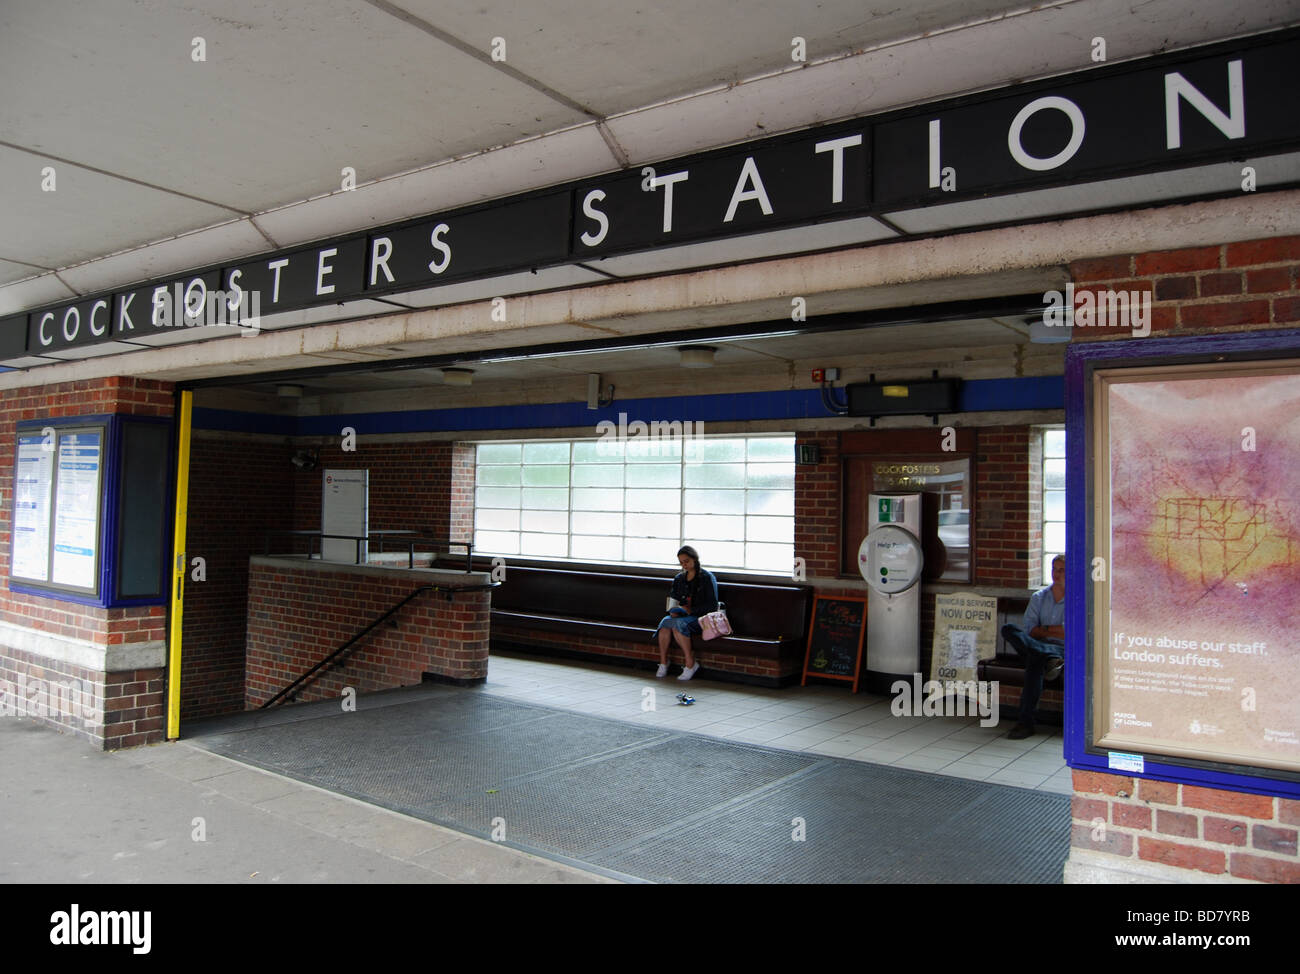 Cockfosters Underground Station Entrance, Cockfosters, North London Stock Photo